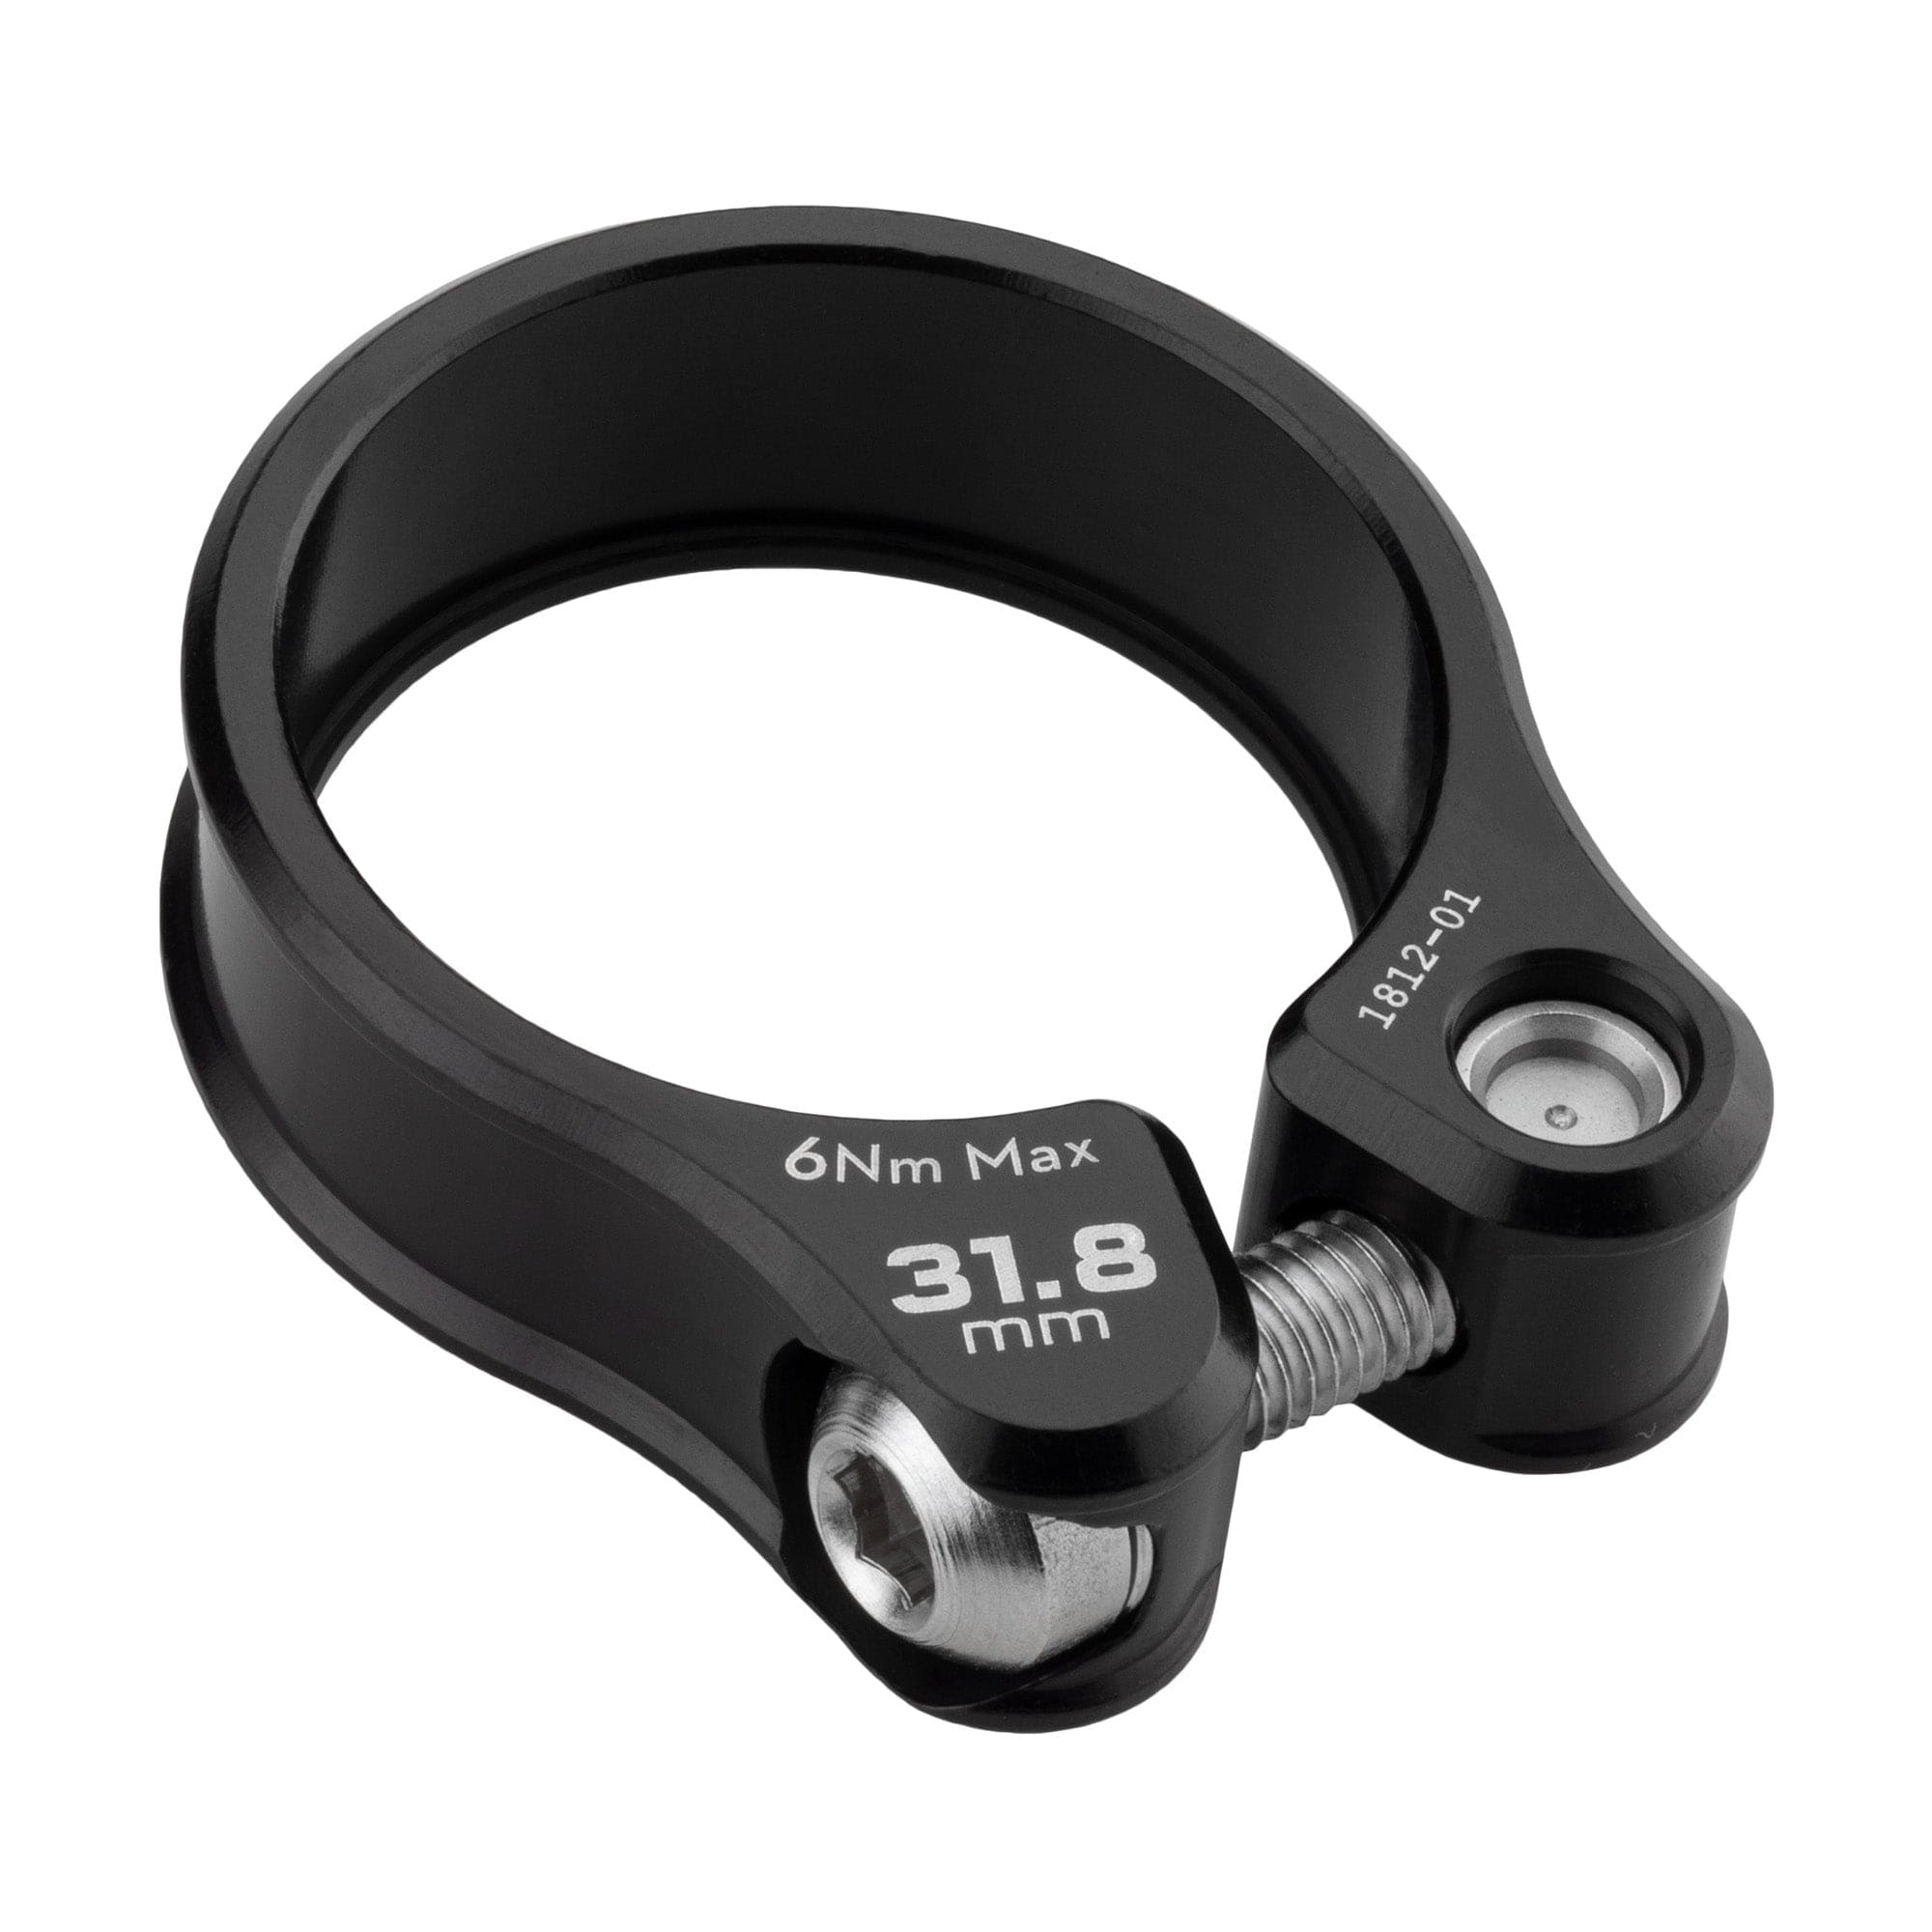 specialized saddle clamp